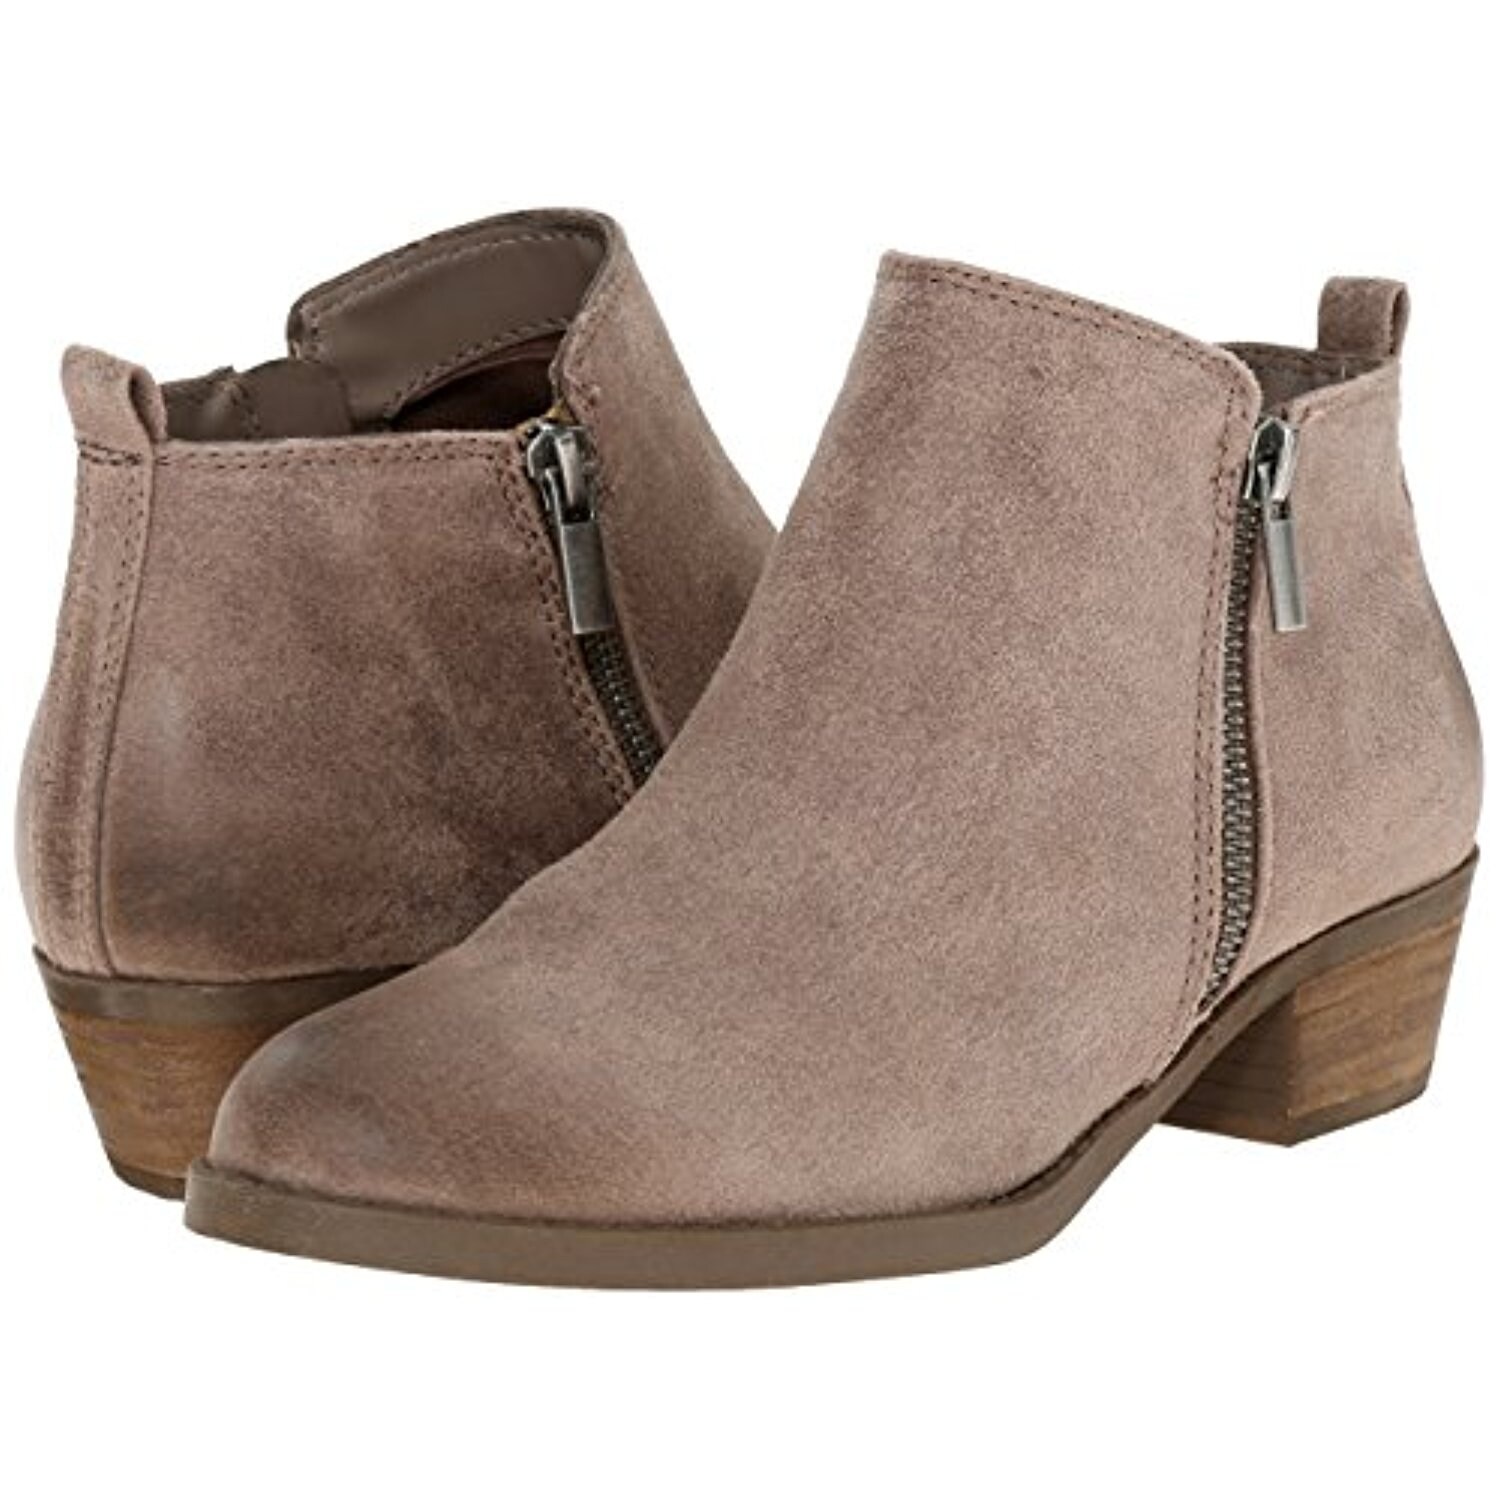 Brie Ankle Bootie, Doe 